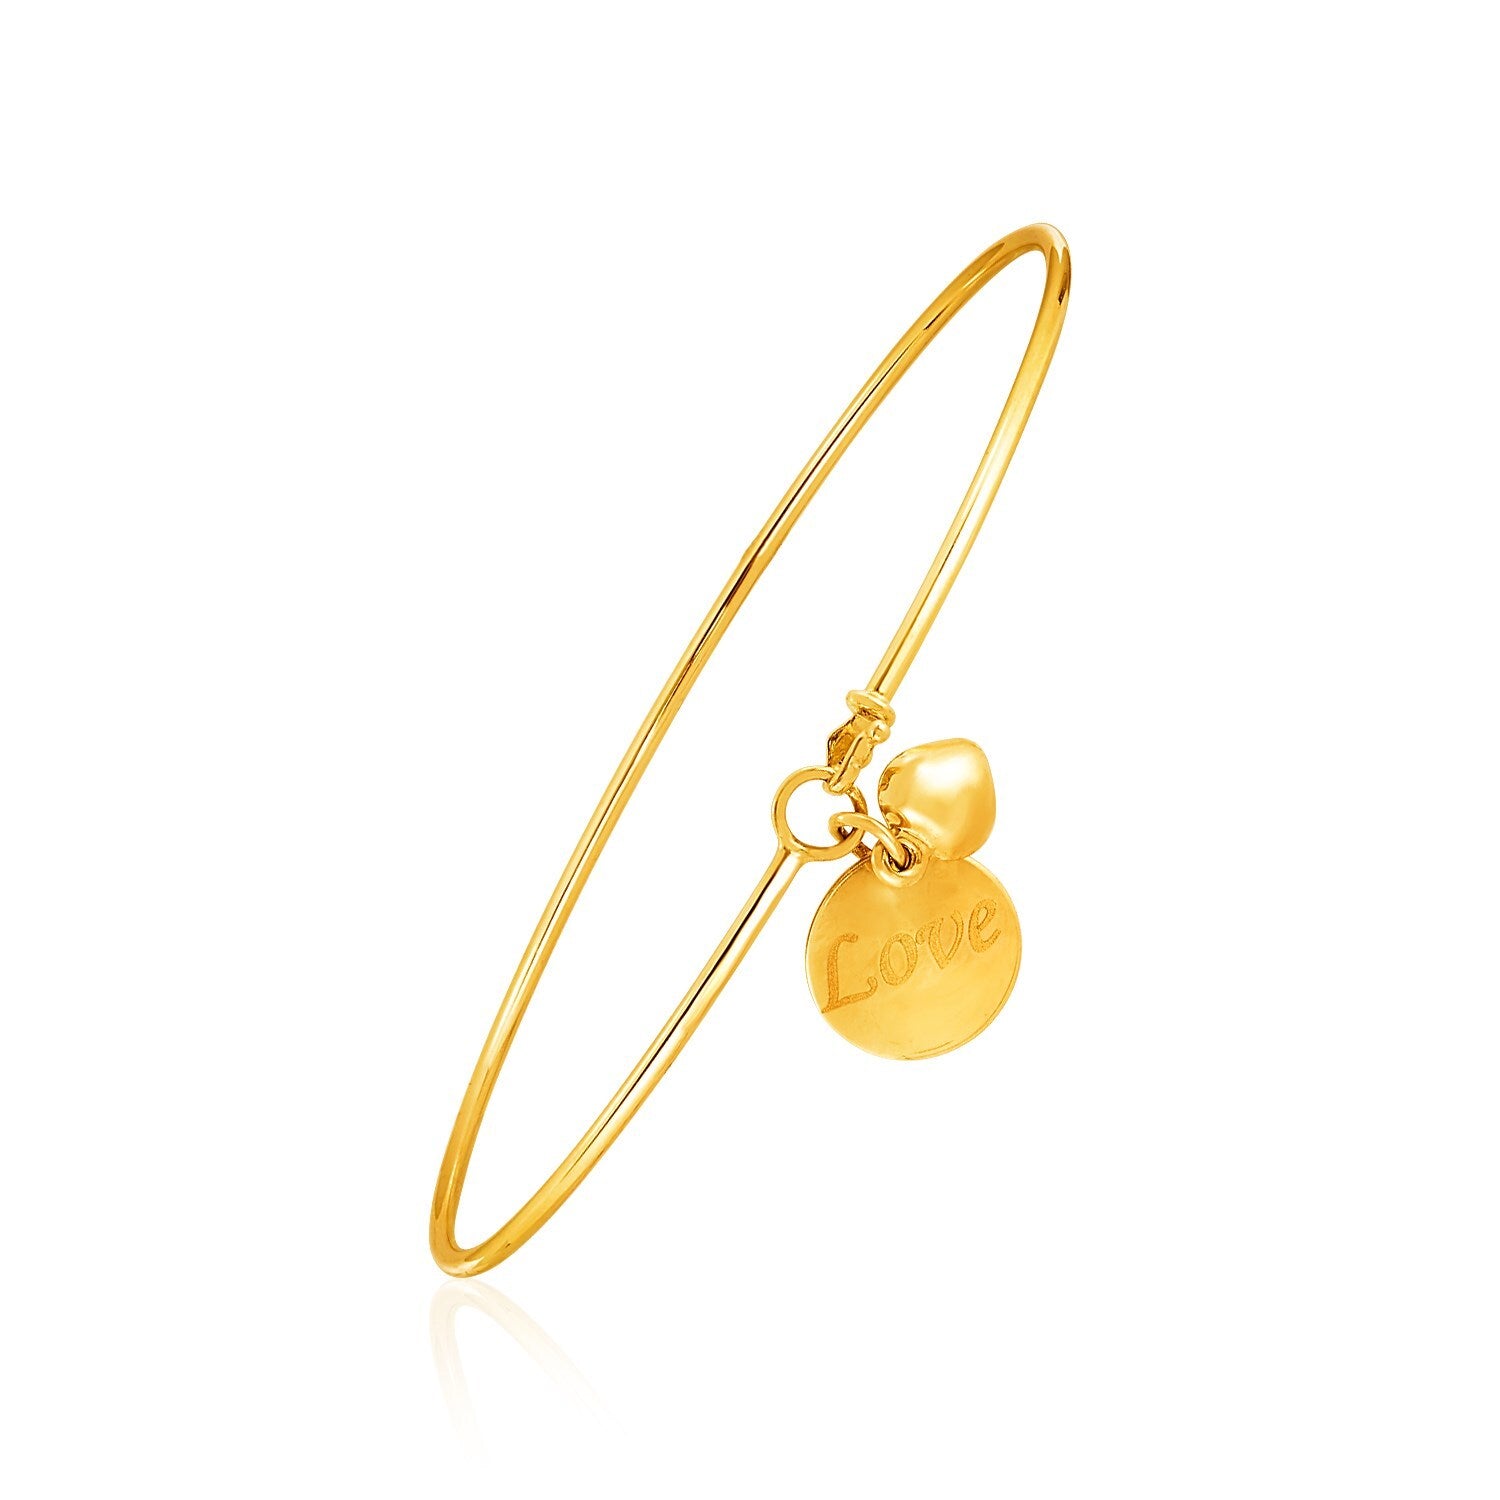 14k Yellow Gold Bangle with Engraved Love and Puffed Heart Charms